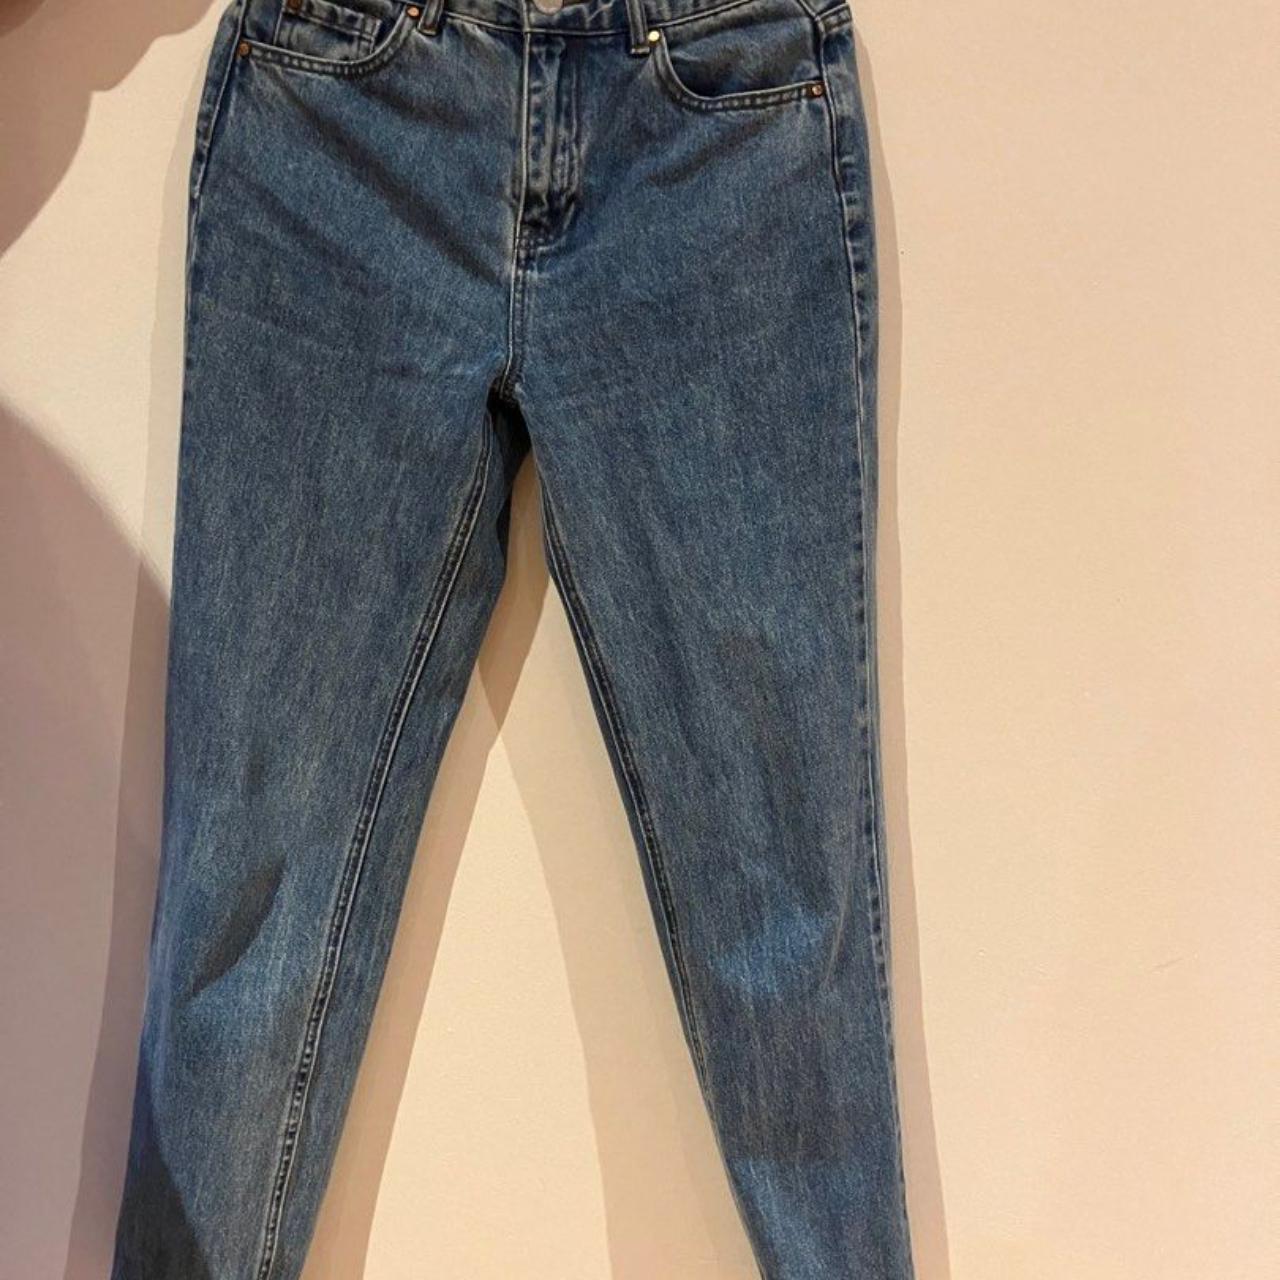 NEW GLASSONS MOM STAIGHT LEG JEANS Glassons... - Depop